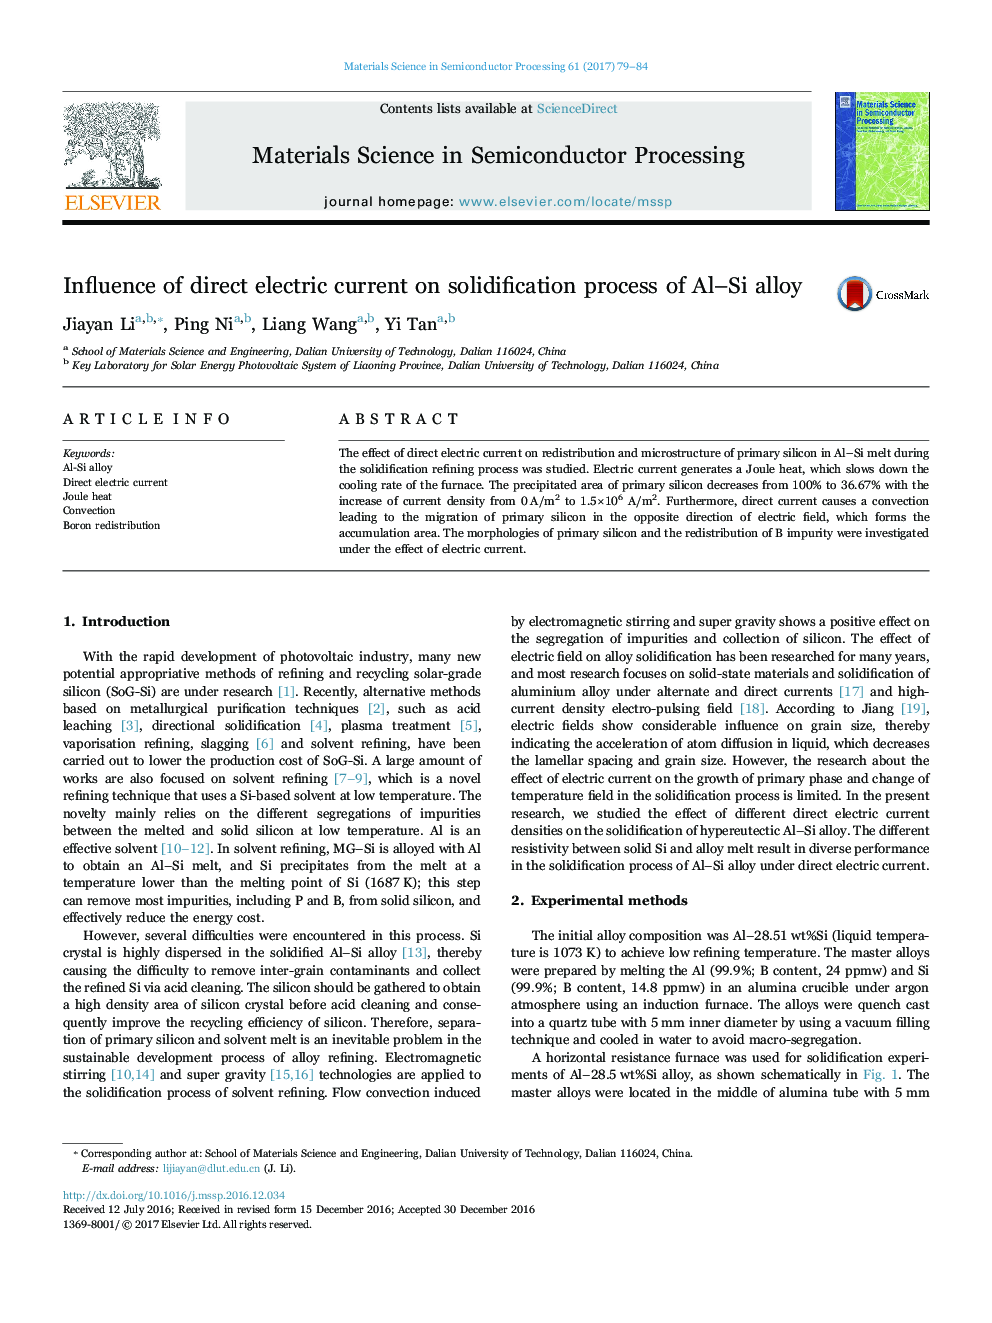 Influence of direct electric current on solidification process of Al-Si alloy